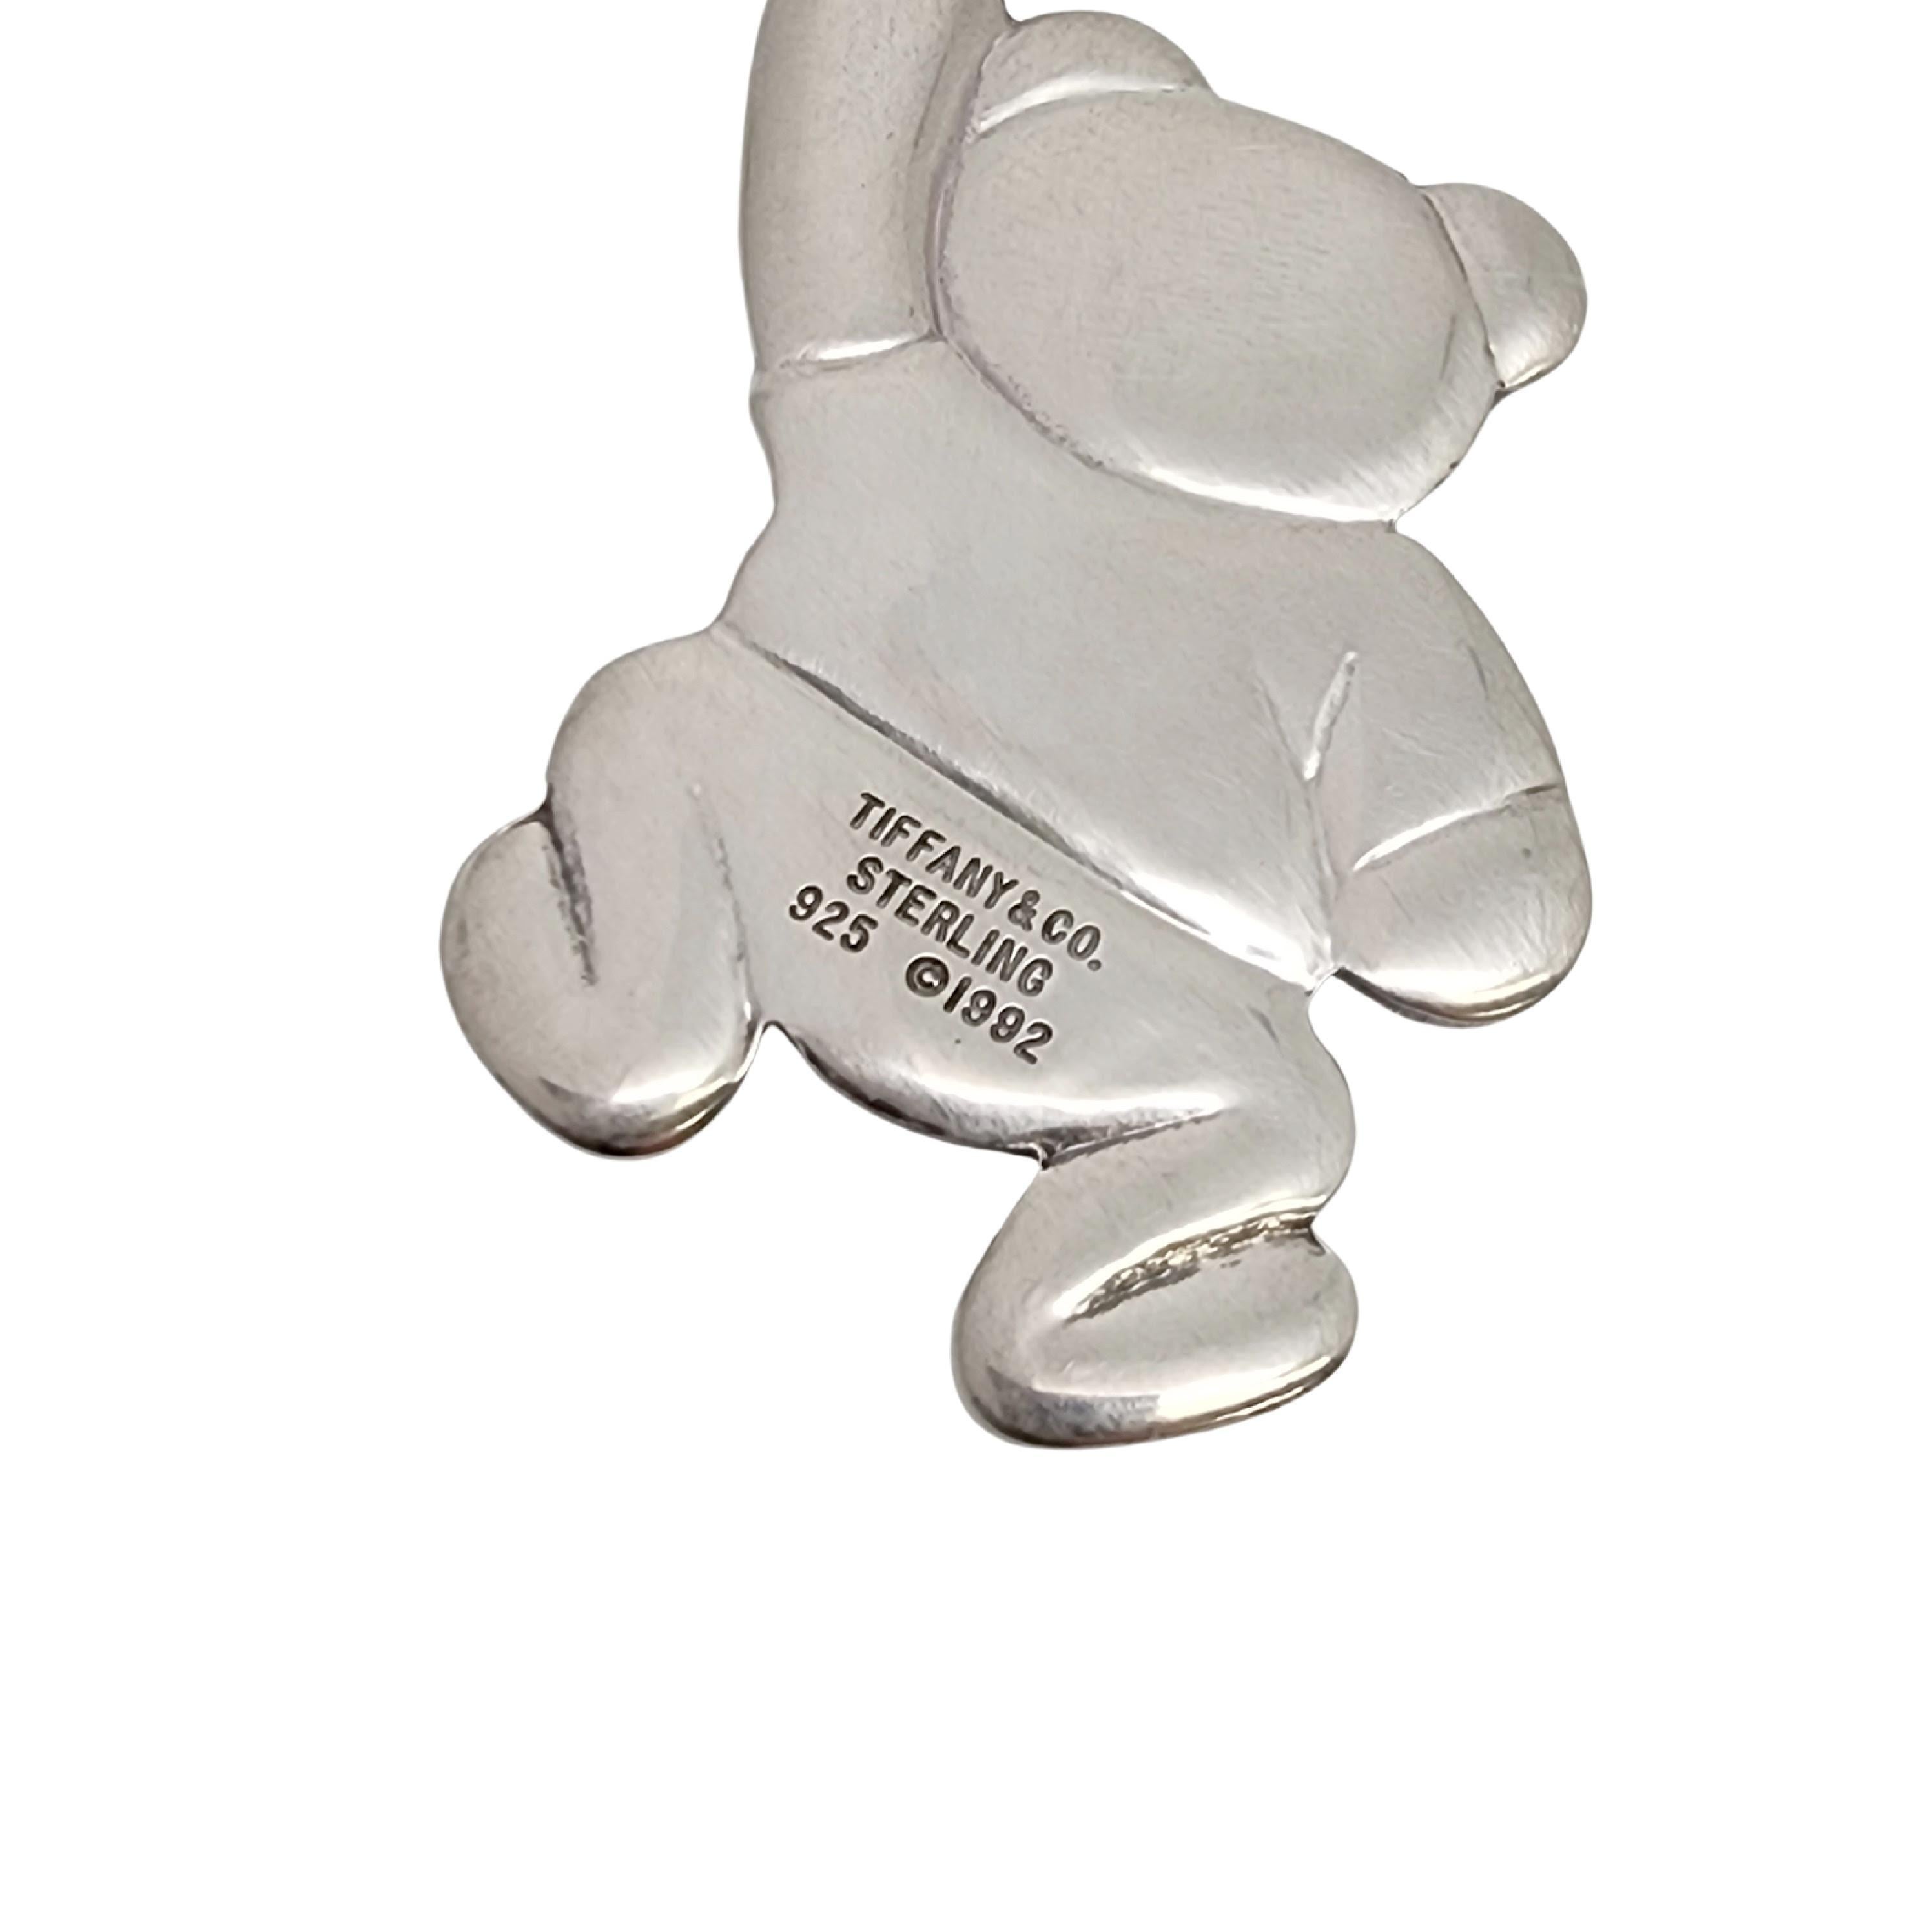 Tiffany & Co Sterling Silver Teddy Bear Baby/Child Spoon w/Box and Pouch #17258 For Sale 4